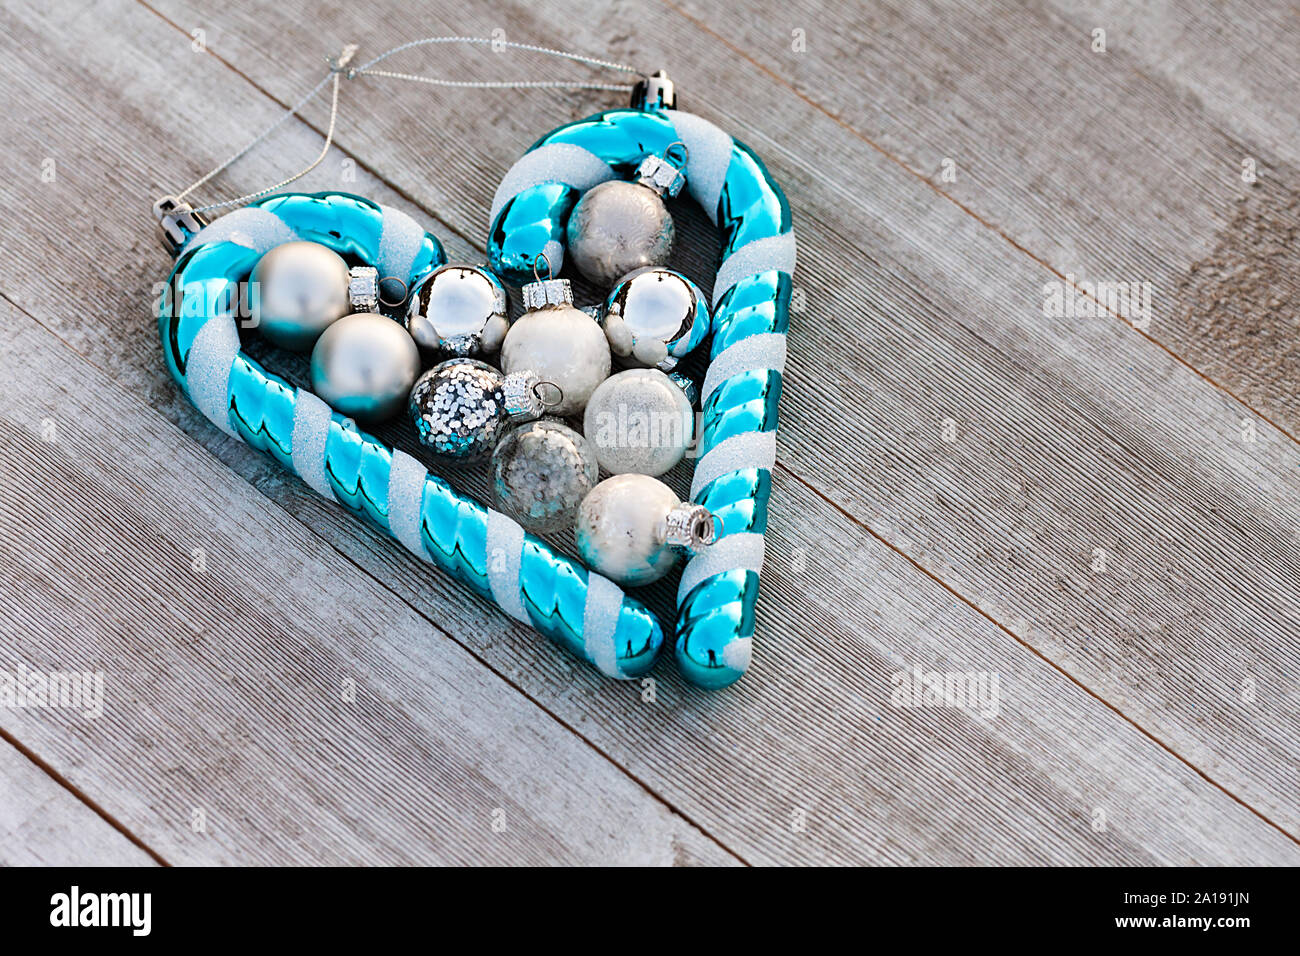 Christmas blue candy cane and silver balls collected on wooden table with copy space on the right, winter holiday concept - Image Stock Photo